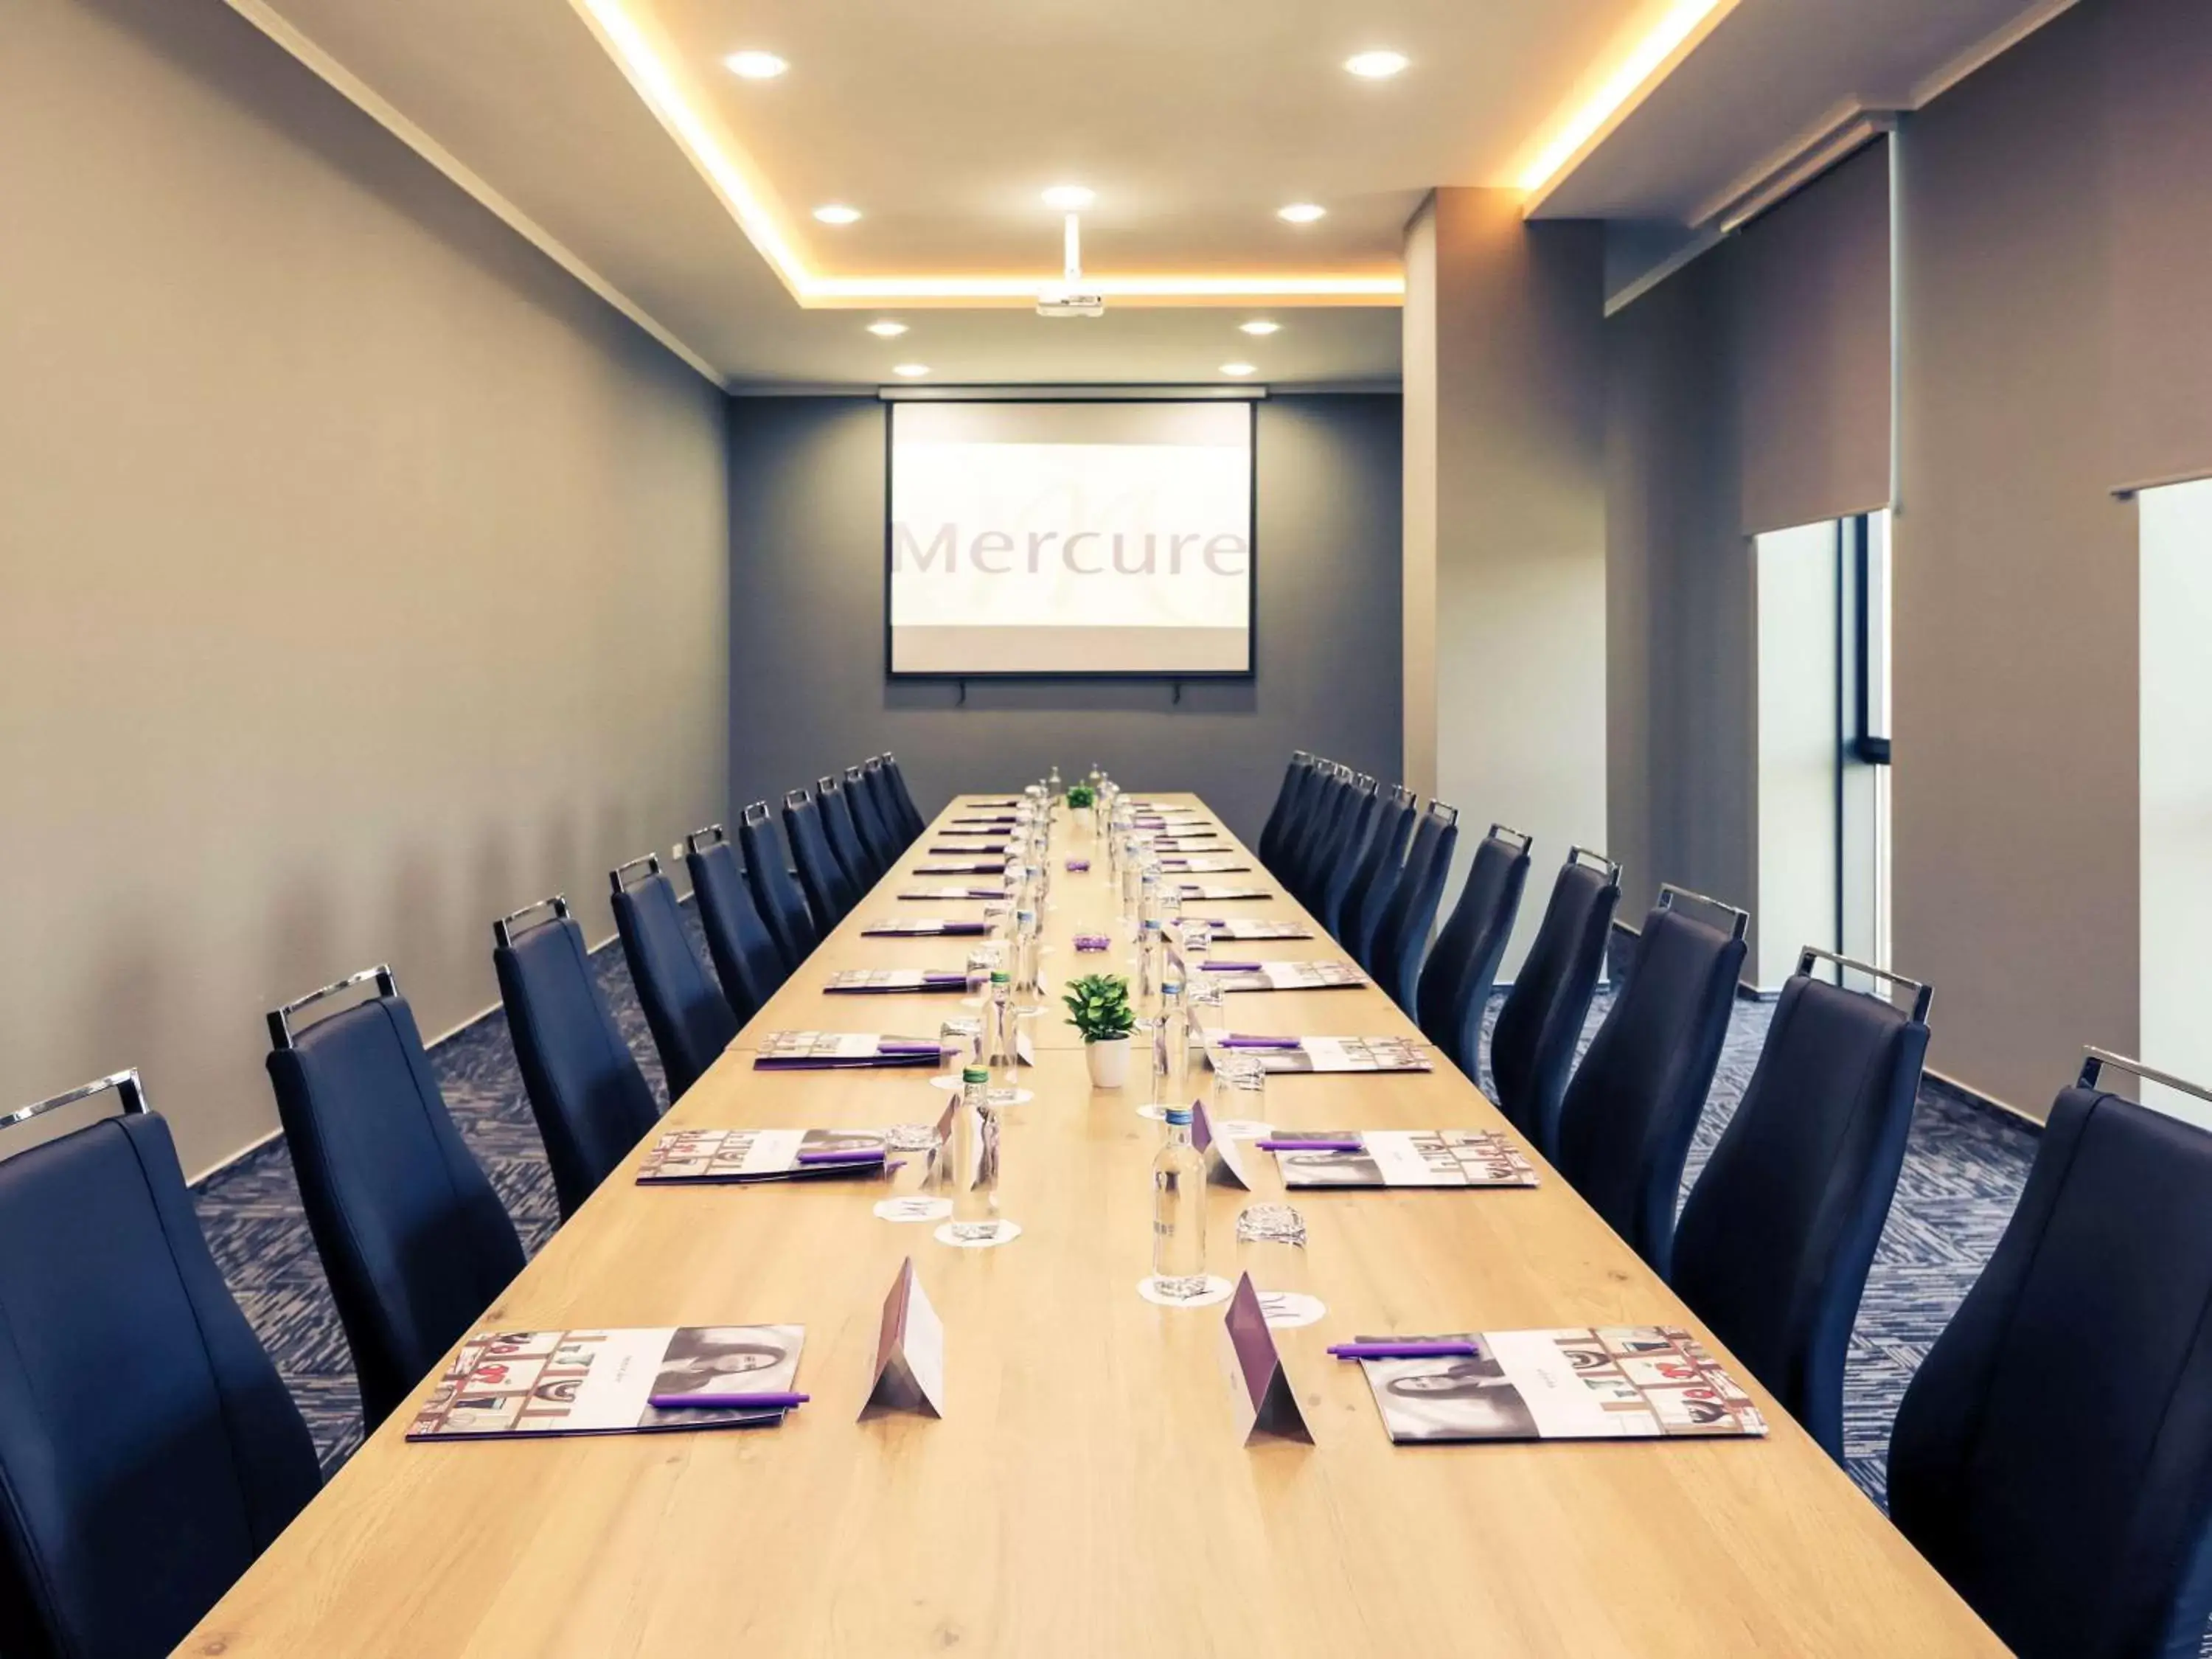 On site, Business Area/Conference Room in Mercure Tetovo